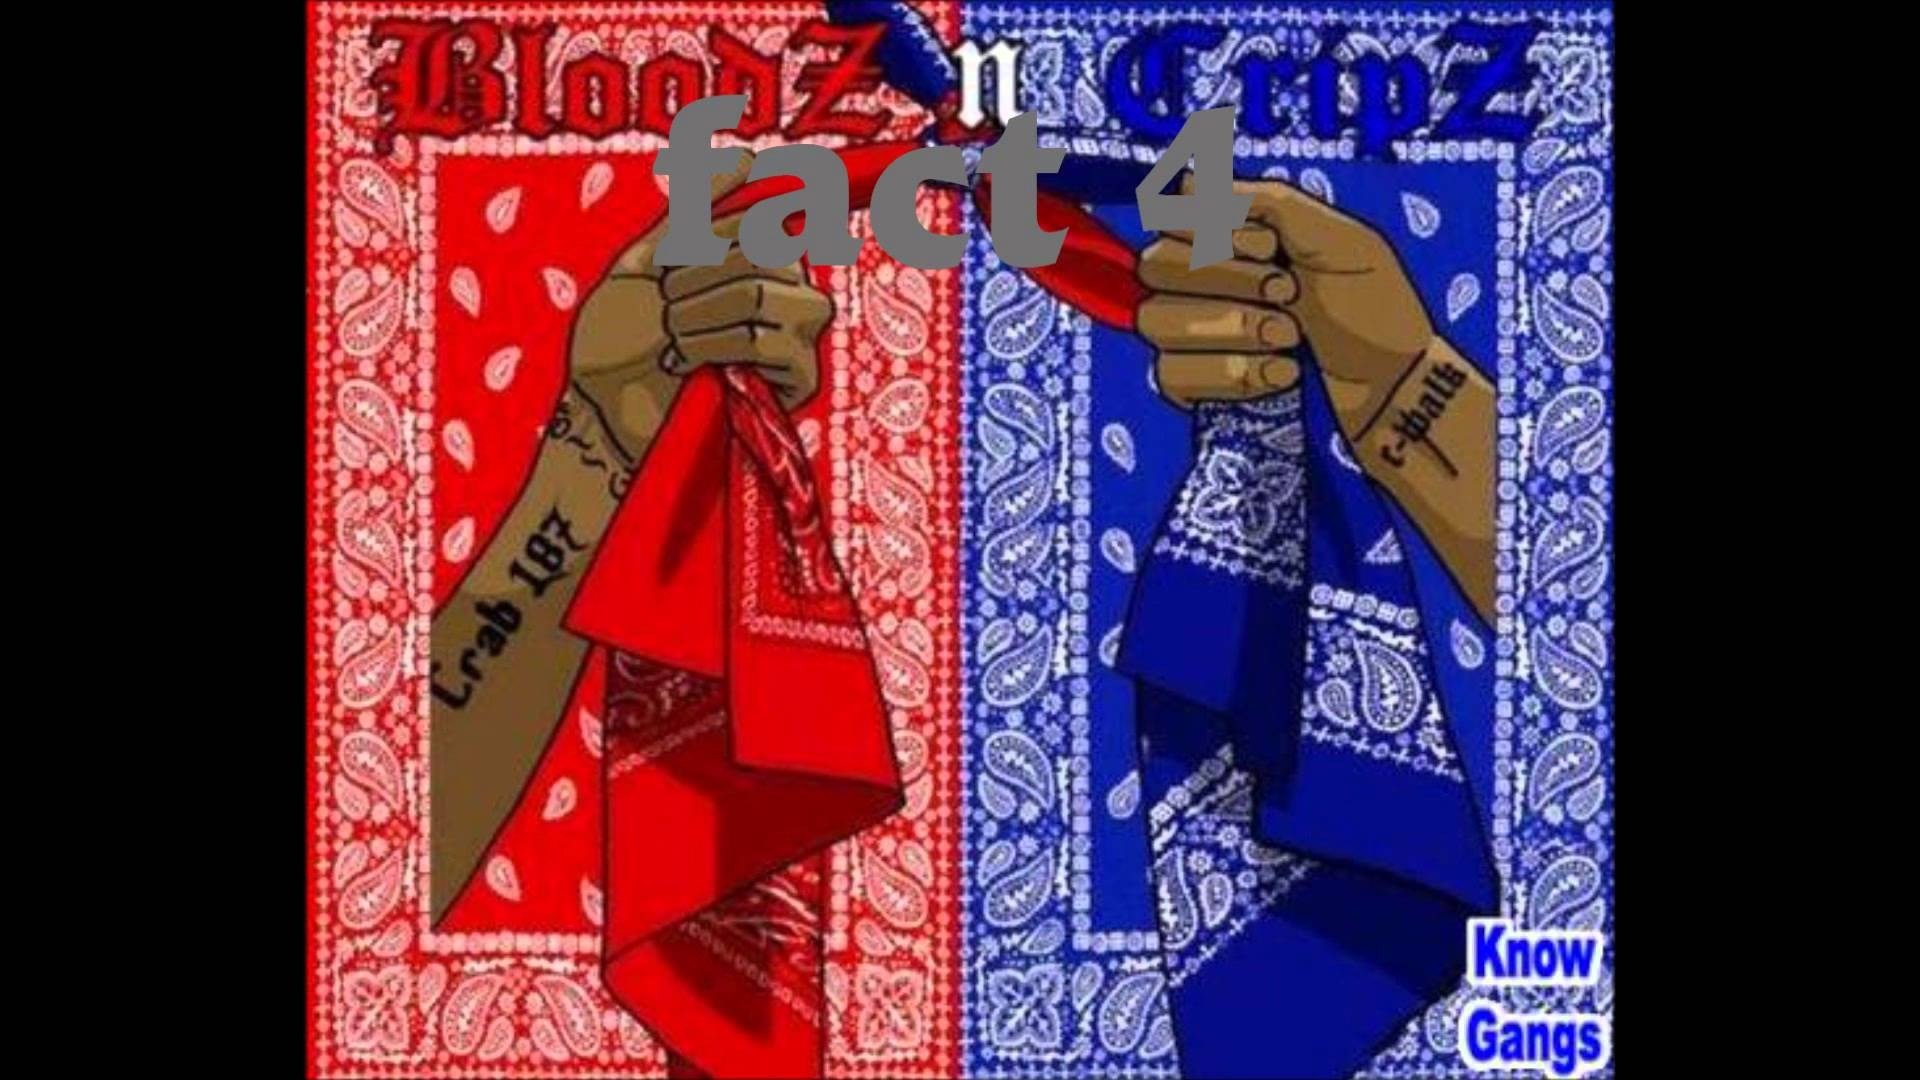 Crips and bloods